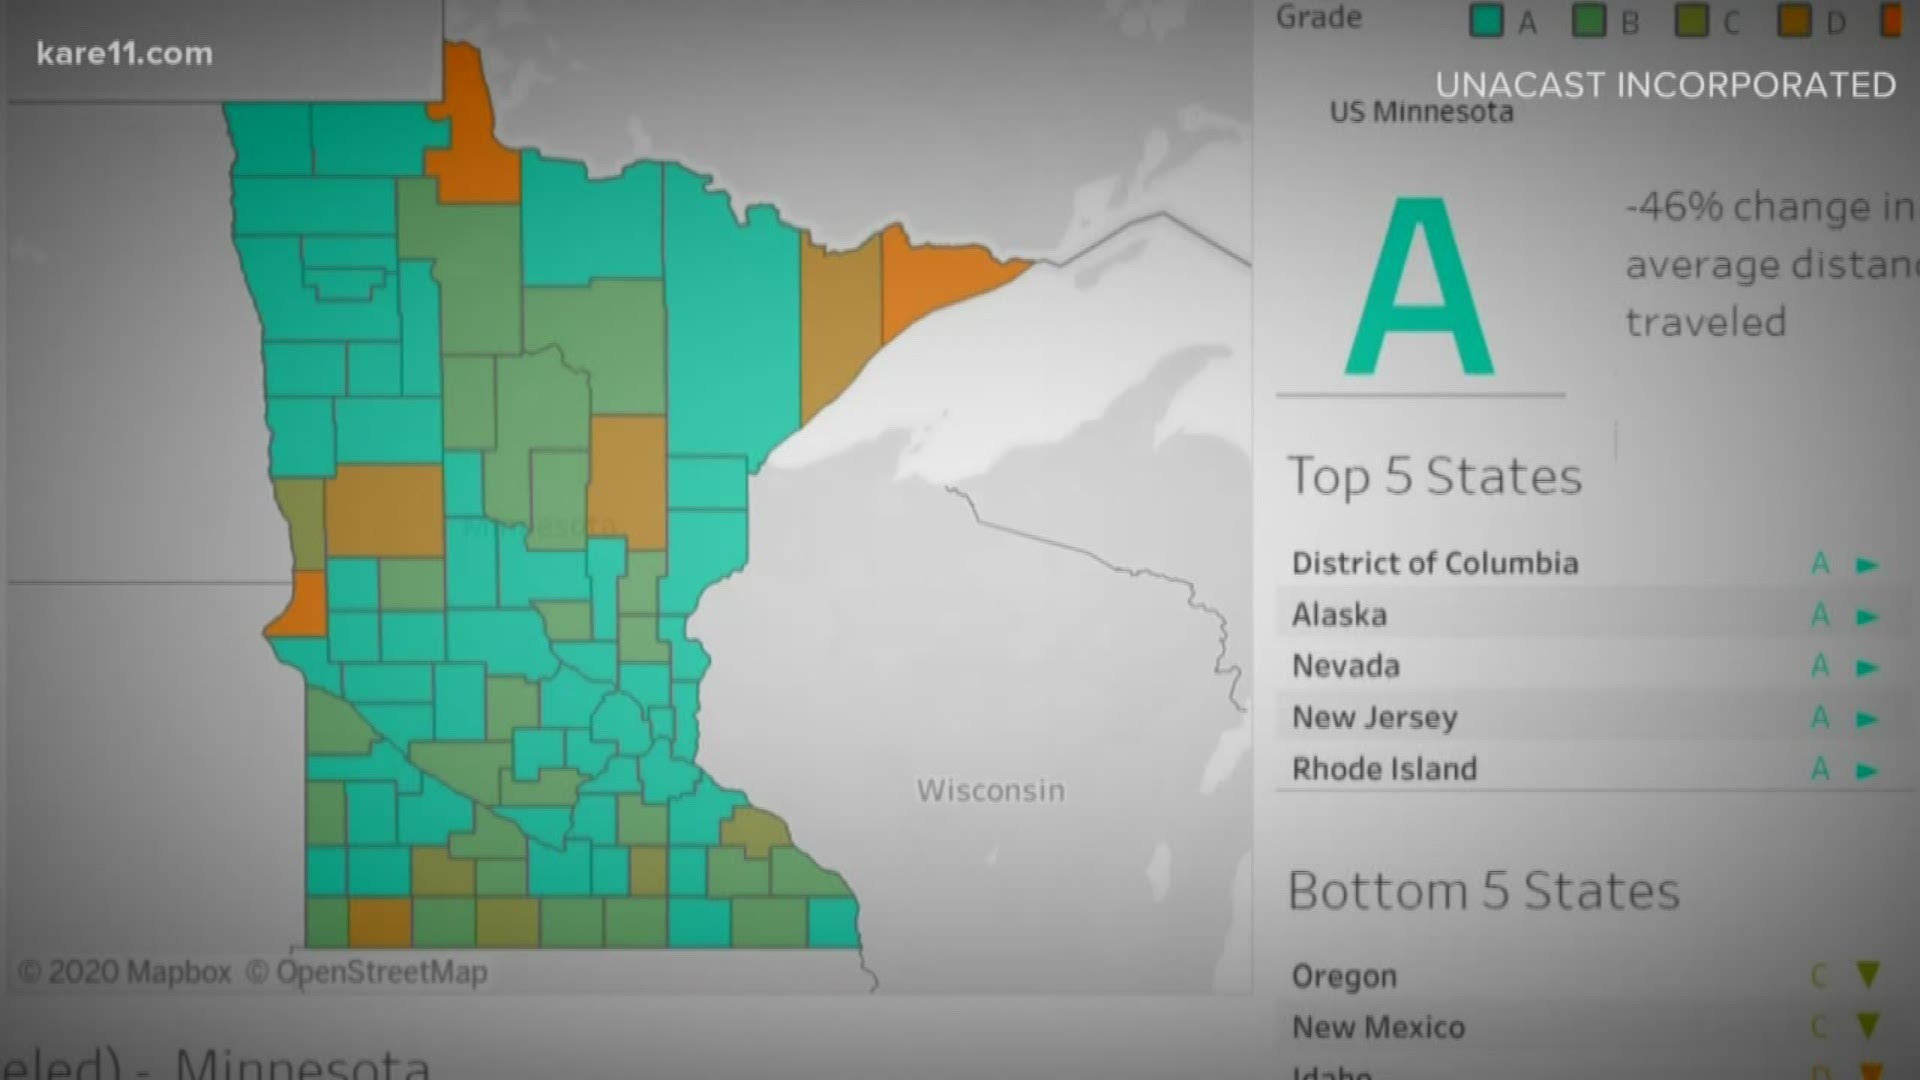 States which scored an 'A' grade showed a 40% or greater decrease in average distance traveled, which Minnesota saw a 46% drop.